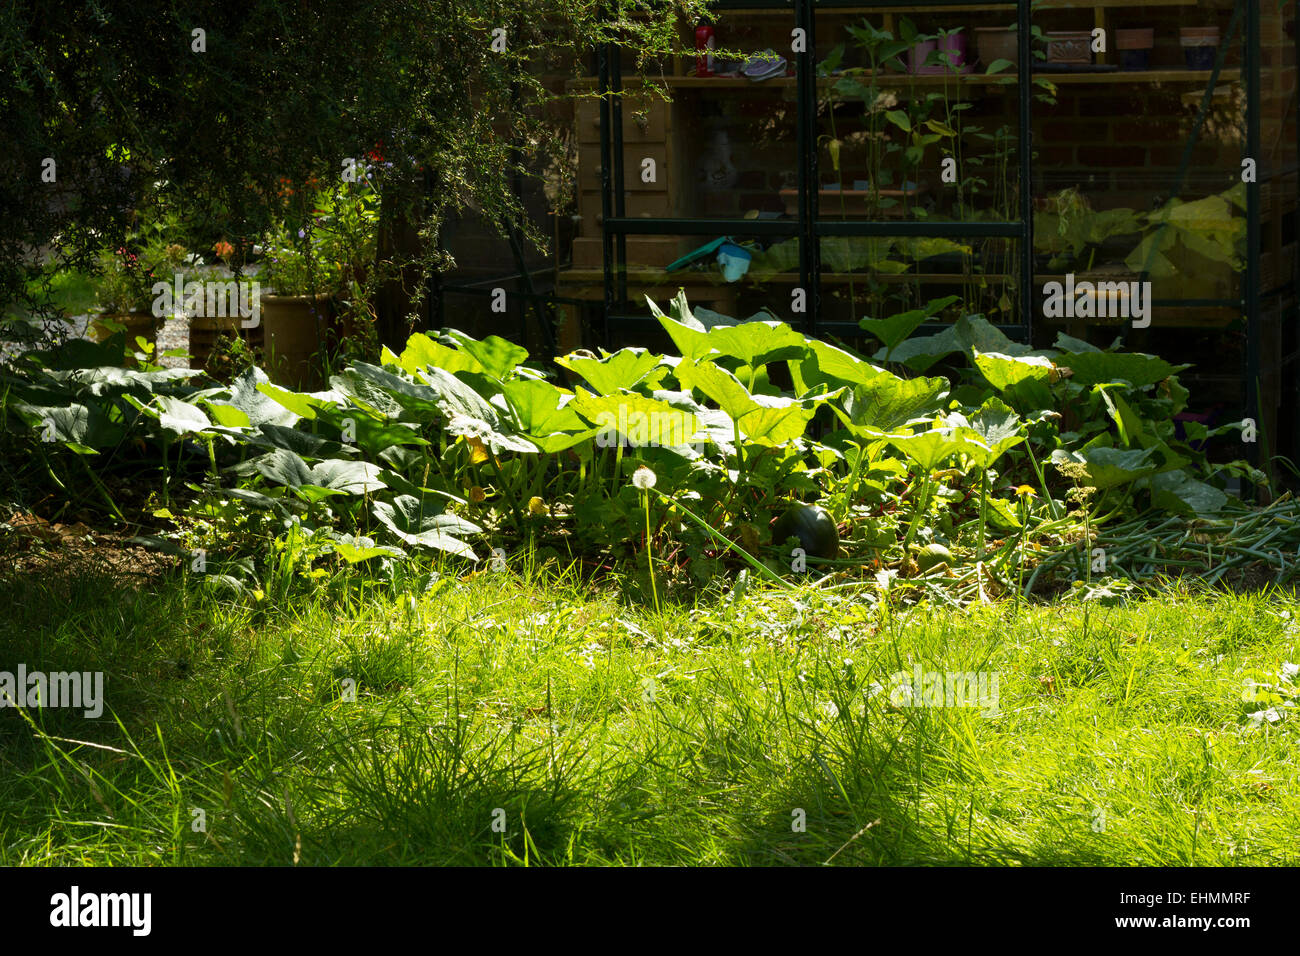 Sun lit vegetable patch with green house behind Stock Photo